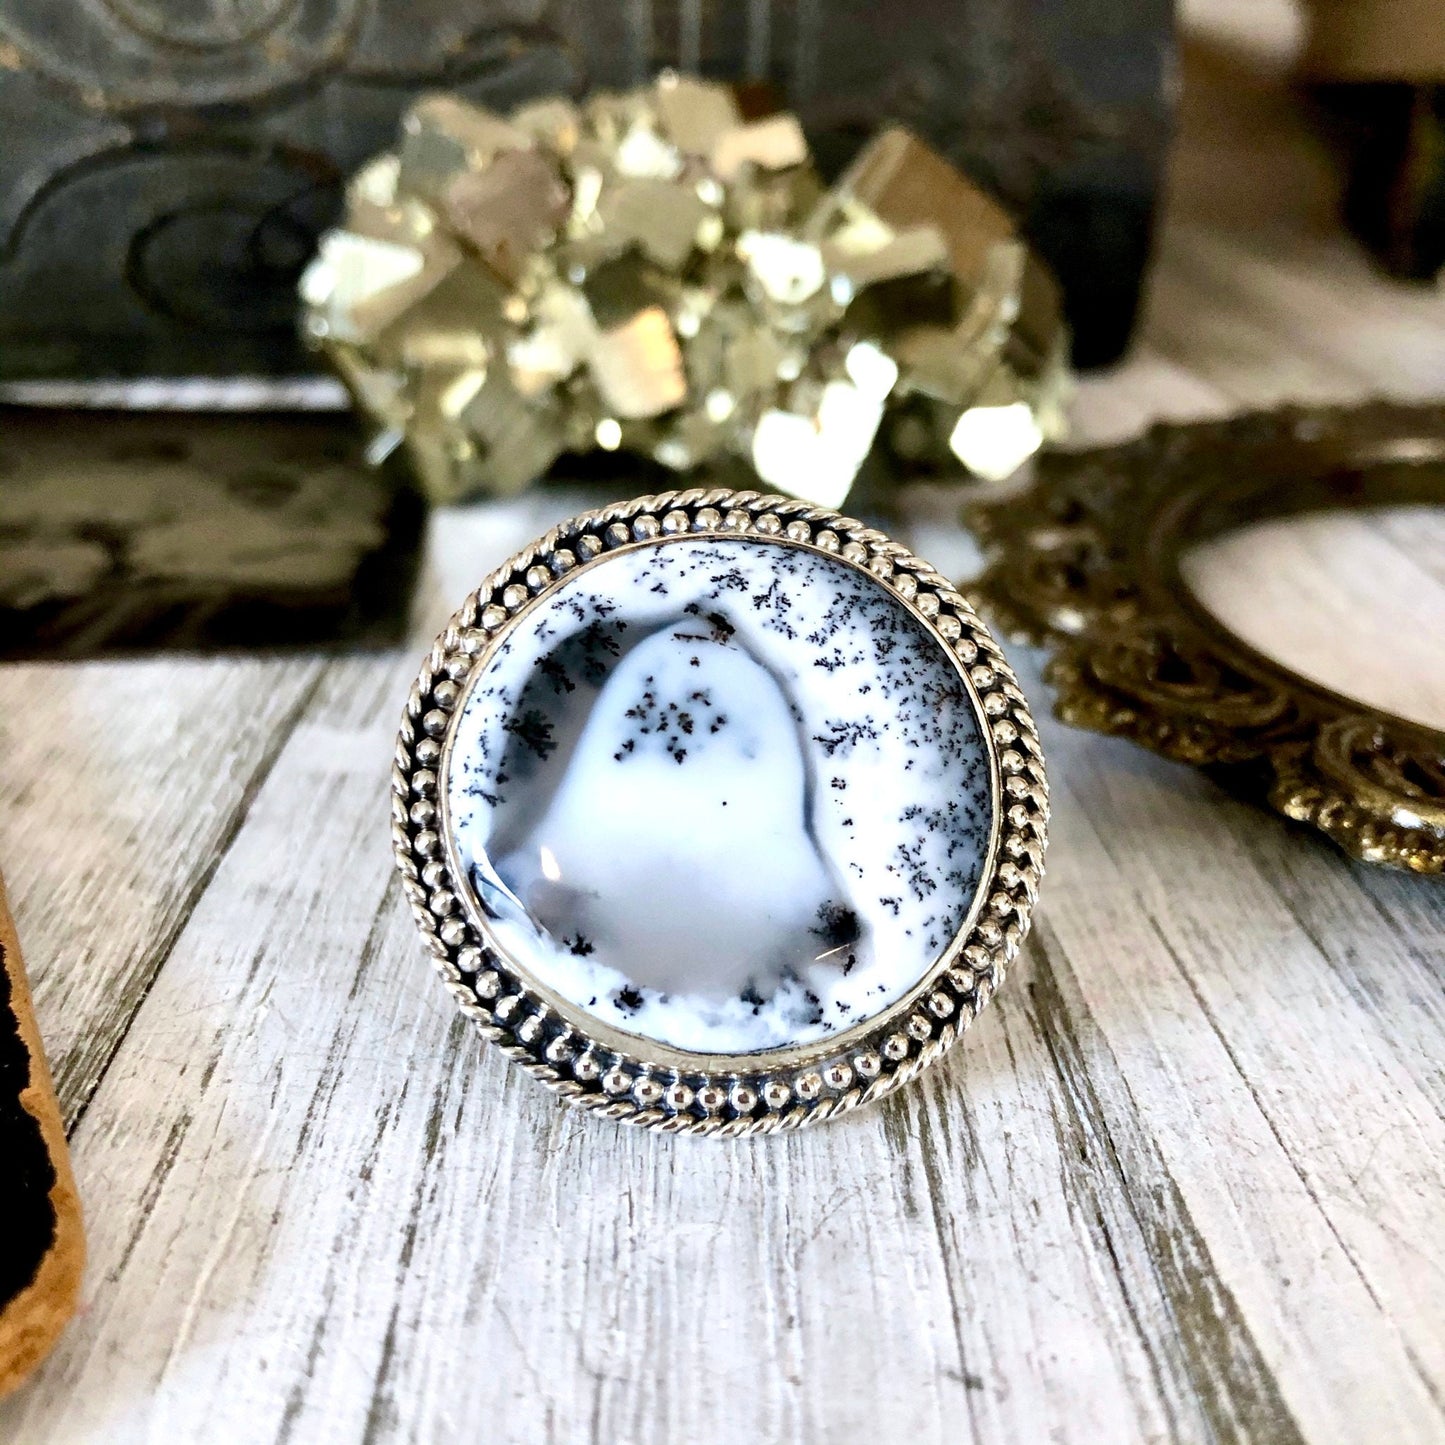 Size 6 Dendritic Opal Statement Ring Set in Sterling Silver / Curated by FOXLARK Collection